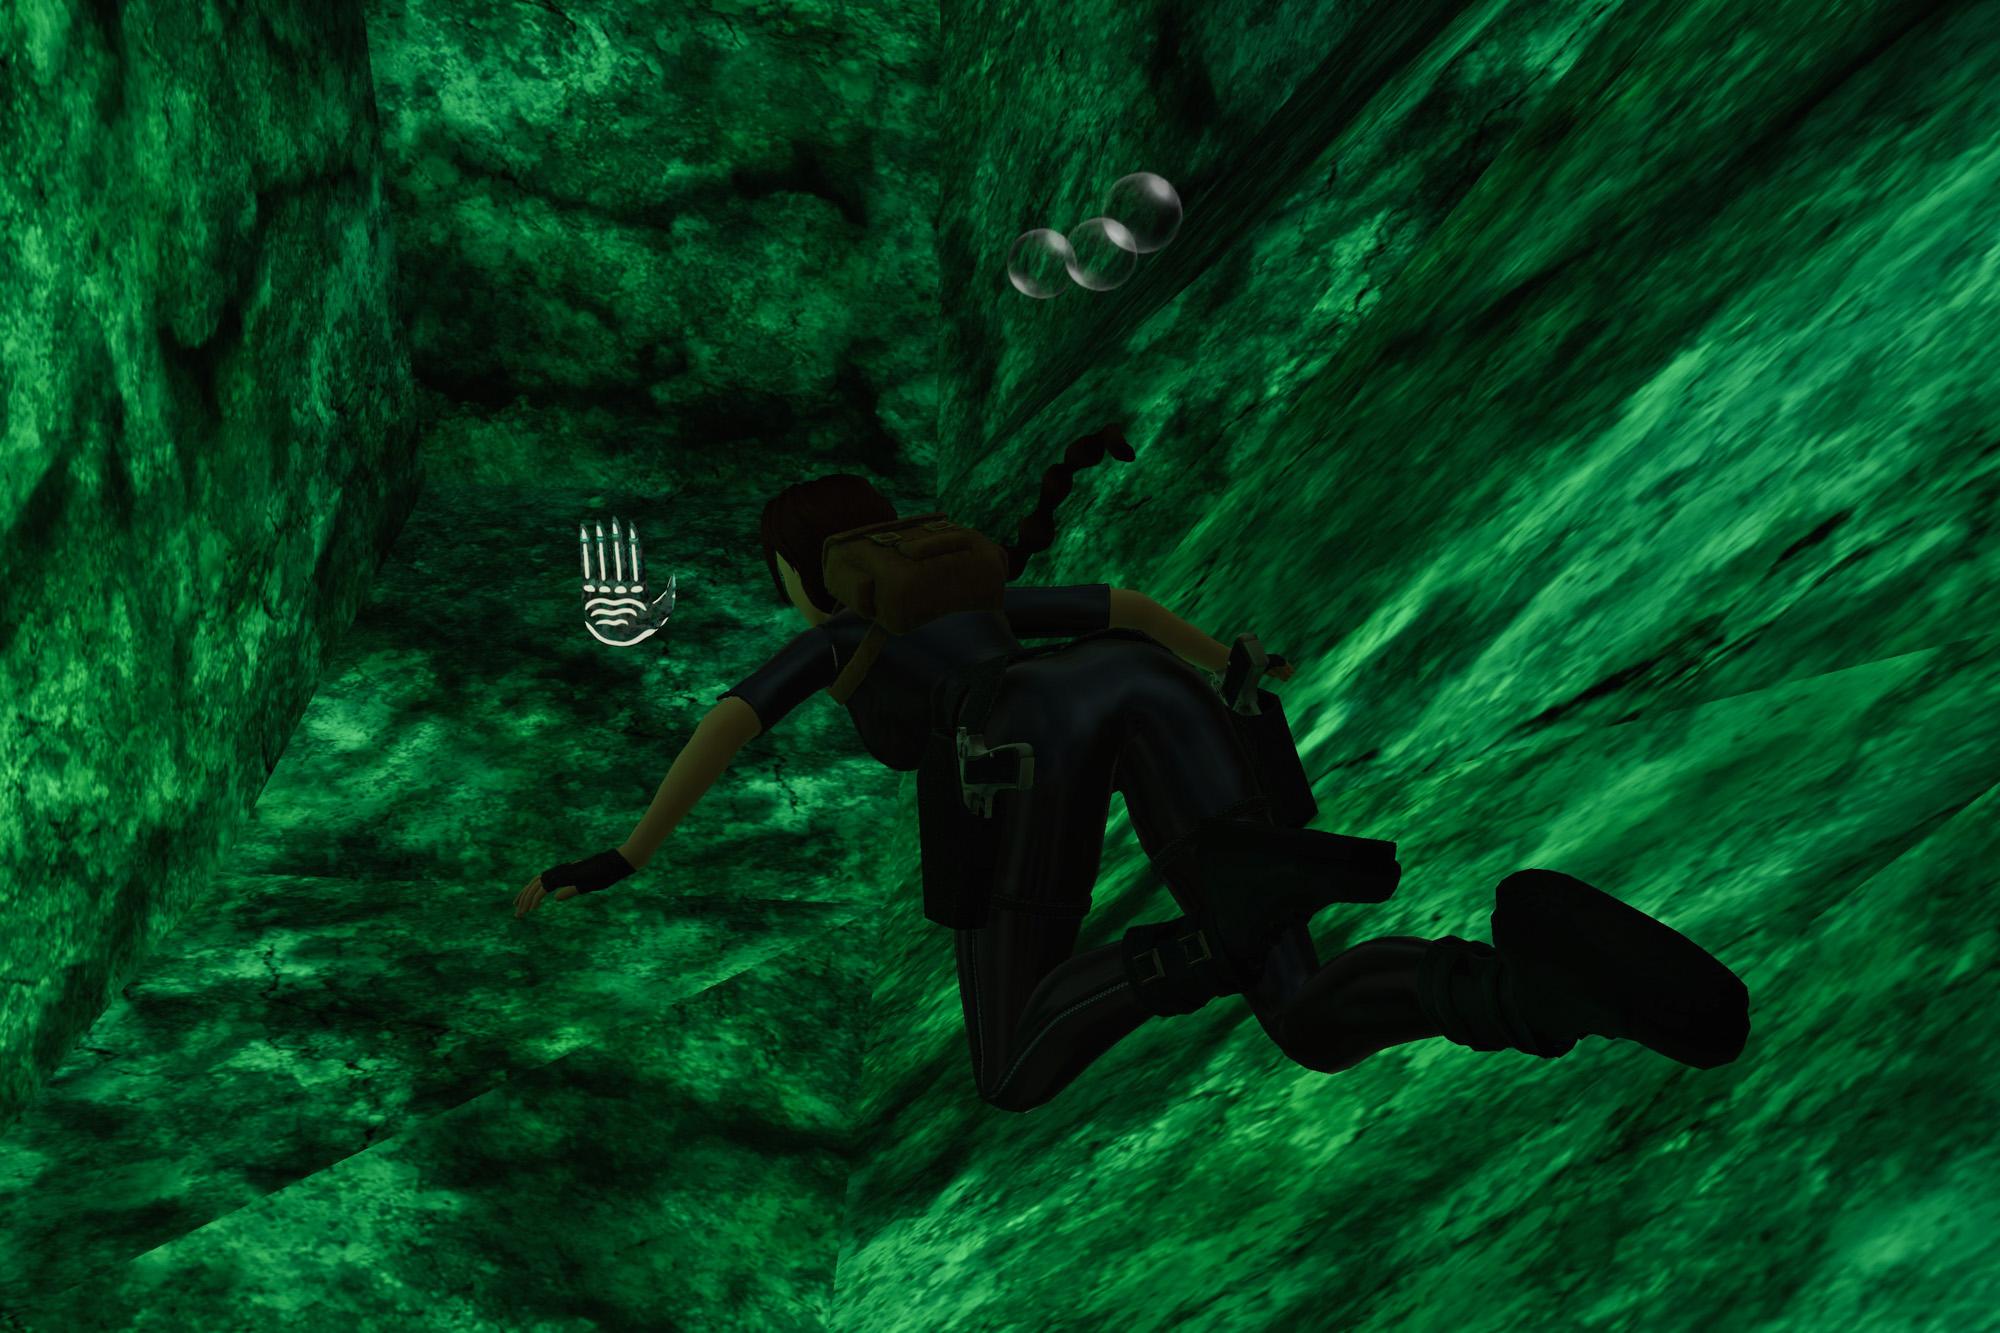 Lara finds the Hand of Rathmore again in the Tomb Raider III's The Lost Artifact explansion, in the level It's a Madhouse